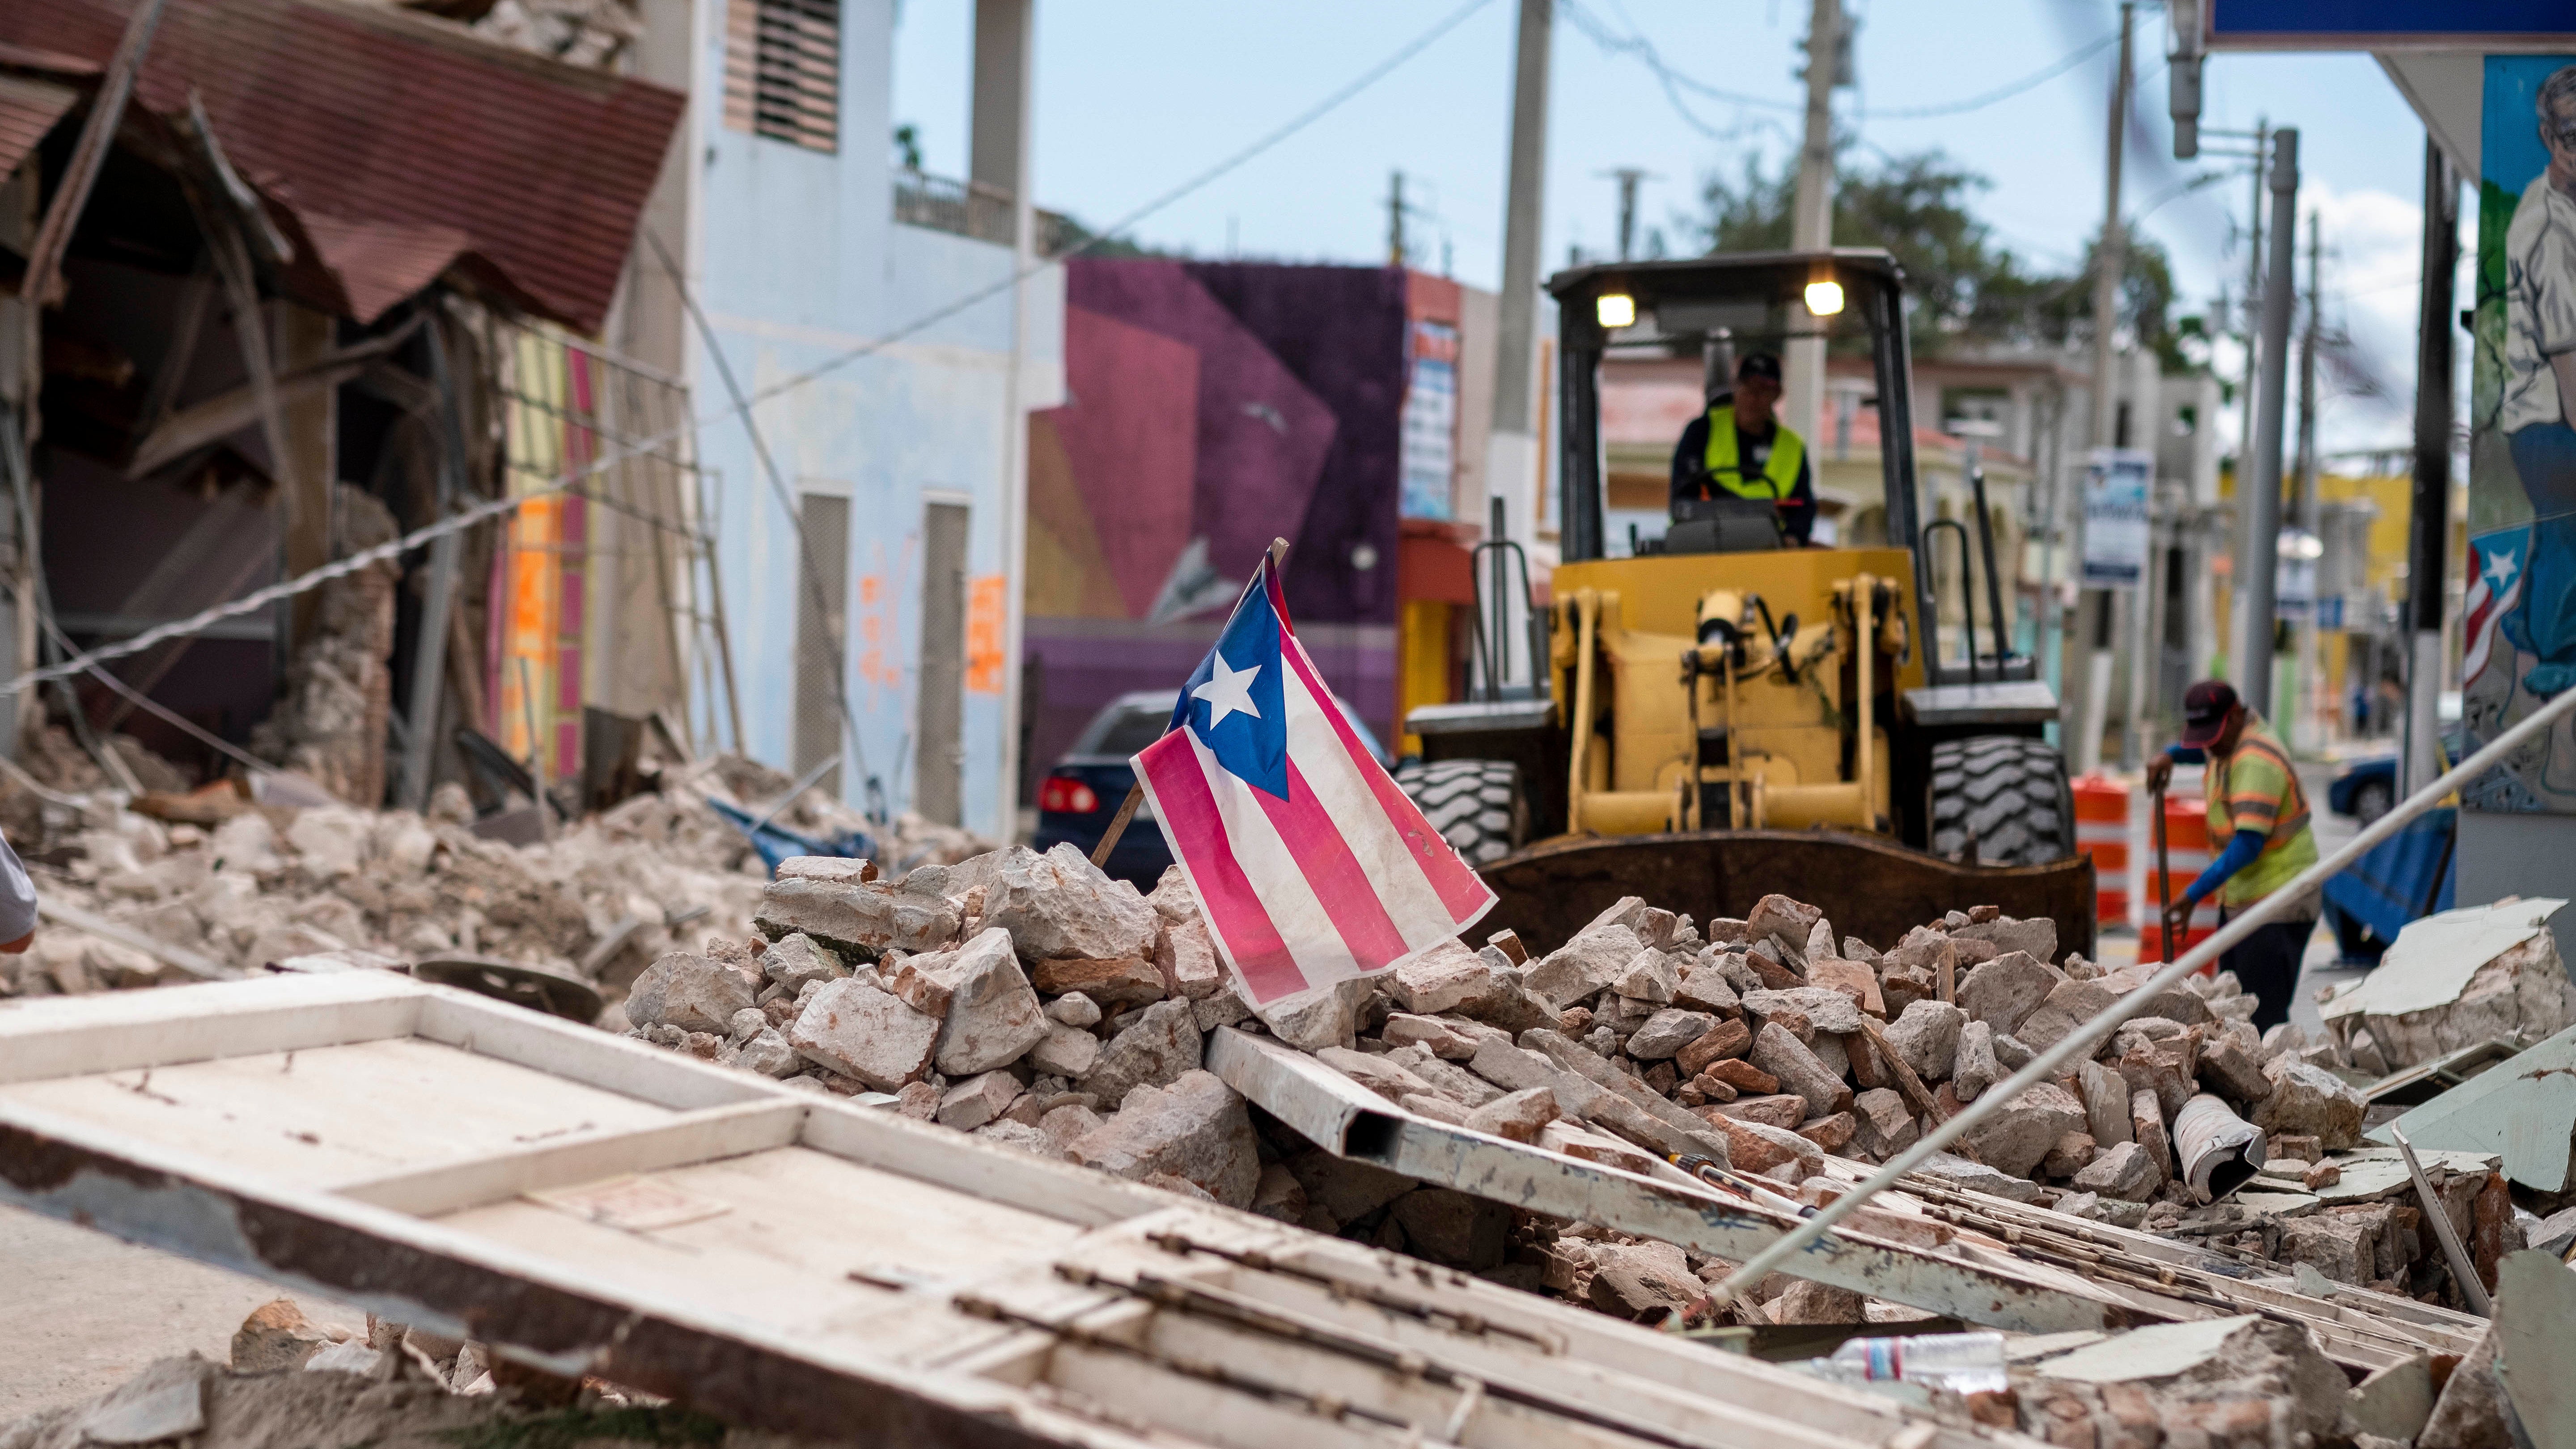 How To Help Puerto Rico Earthquake Relief Efforts